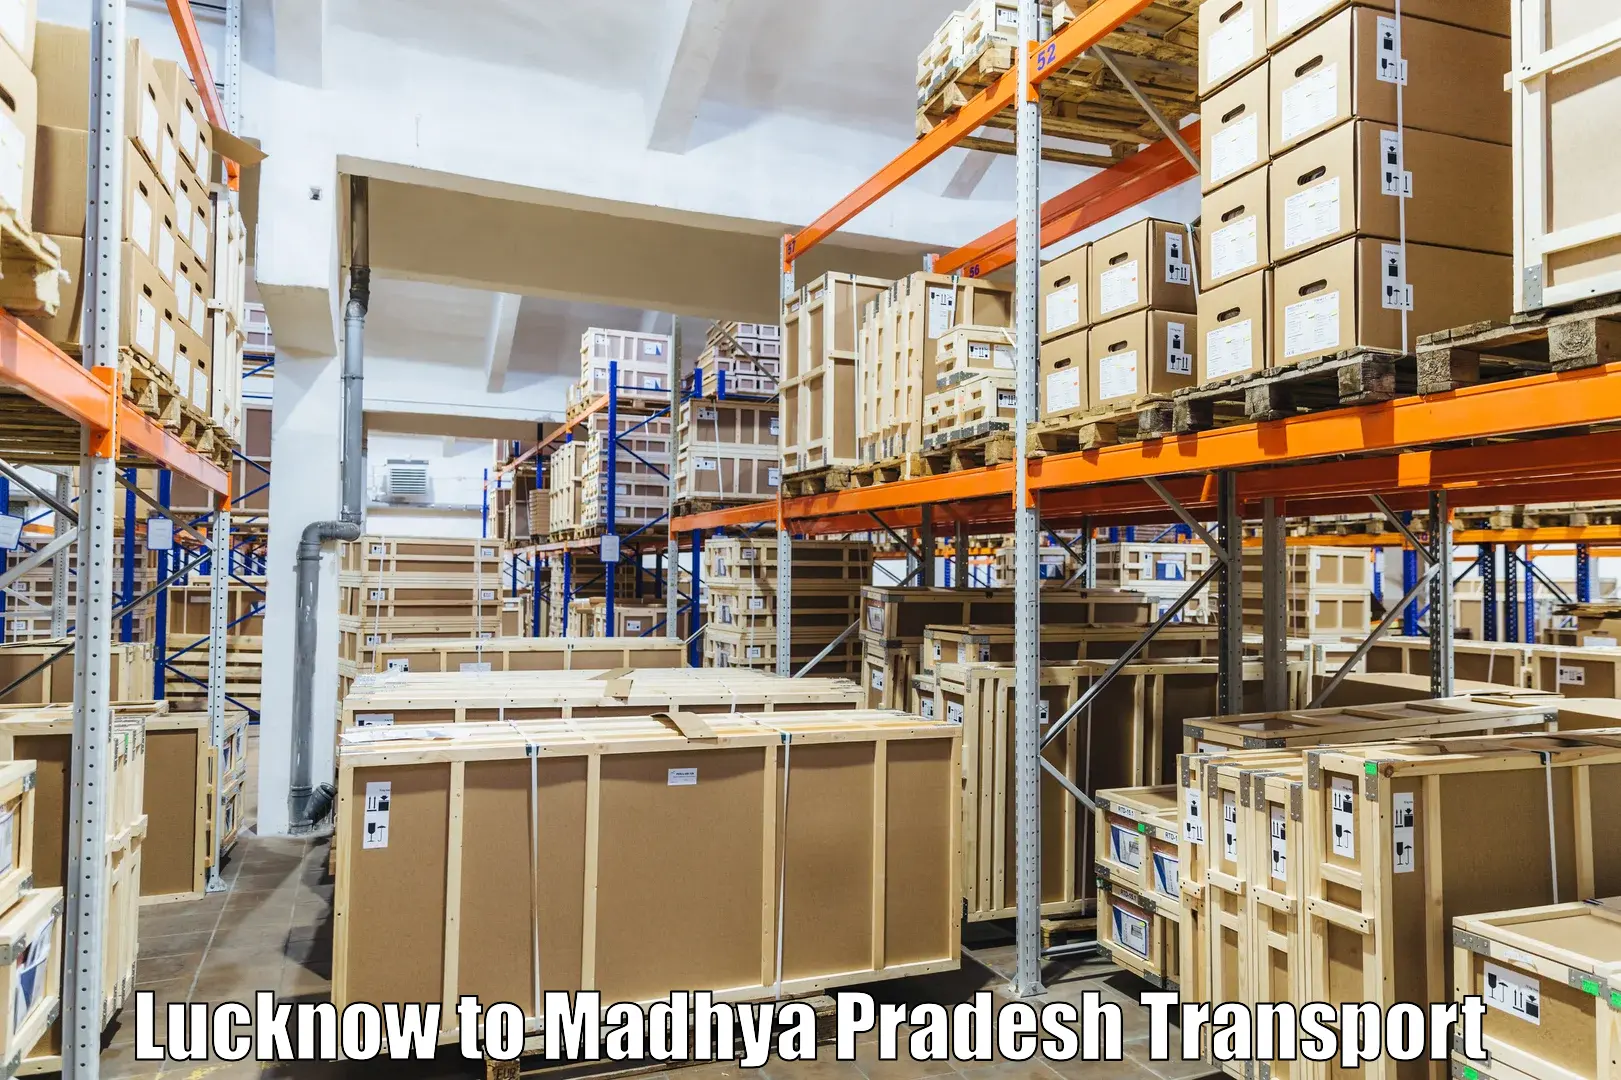 Truck transport companies in India Lucknow to Udaipura